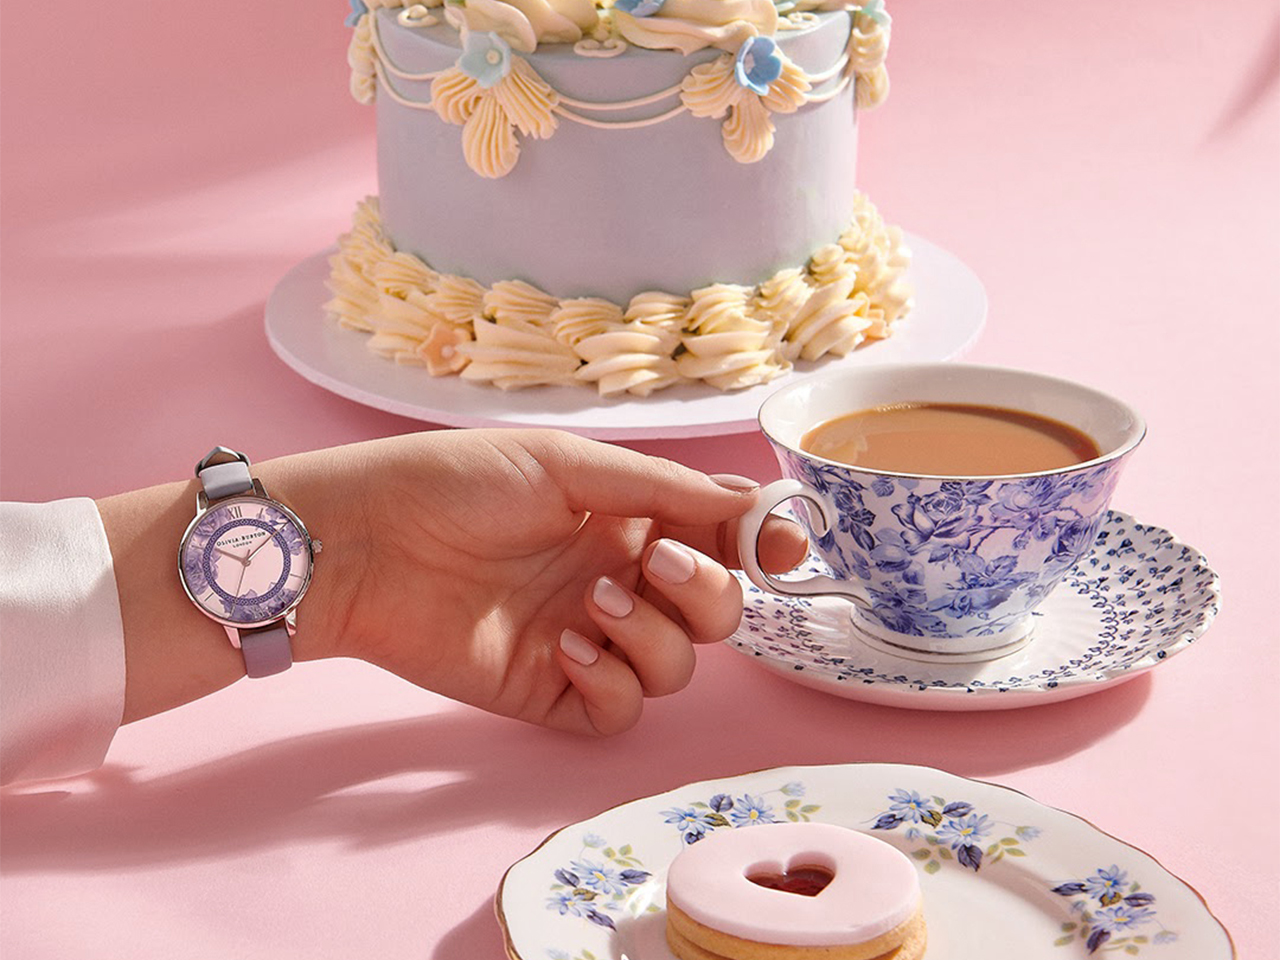 OLIVIA BURTON COLLABORATES WITH PEGGY PORSCHEN ON THE LAUNCH OF ITS TEA PARTY COLLECTION